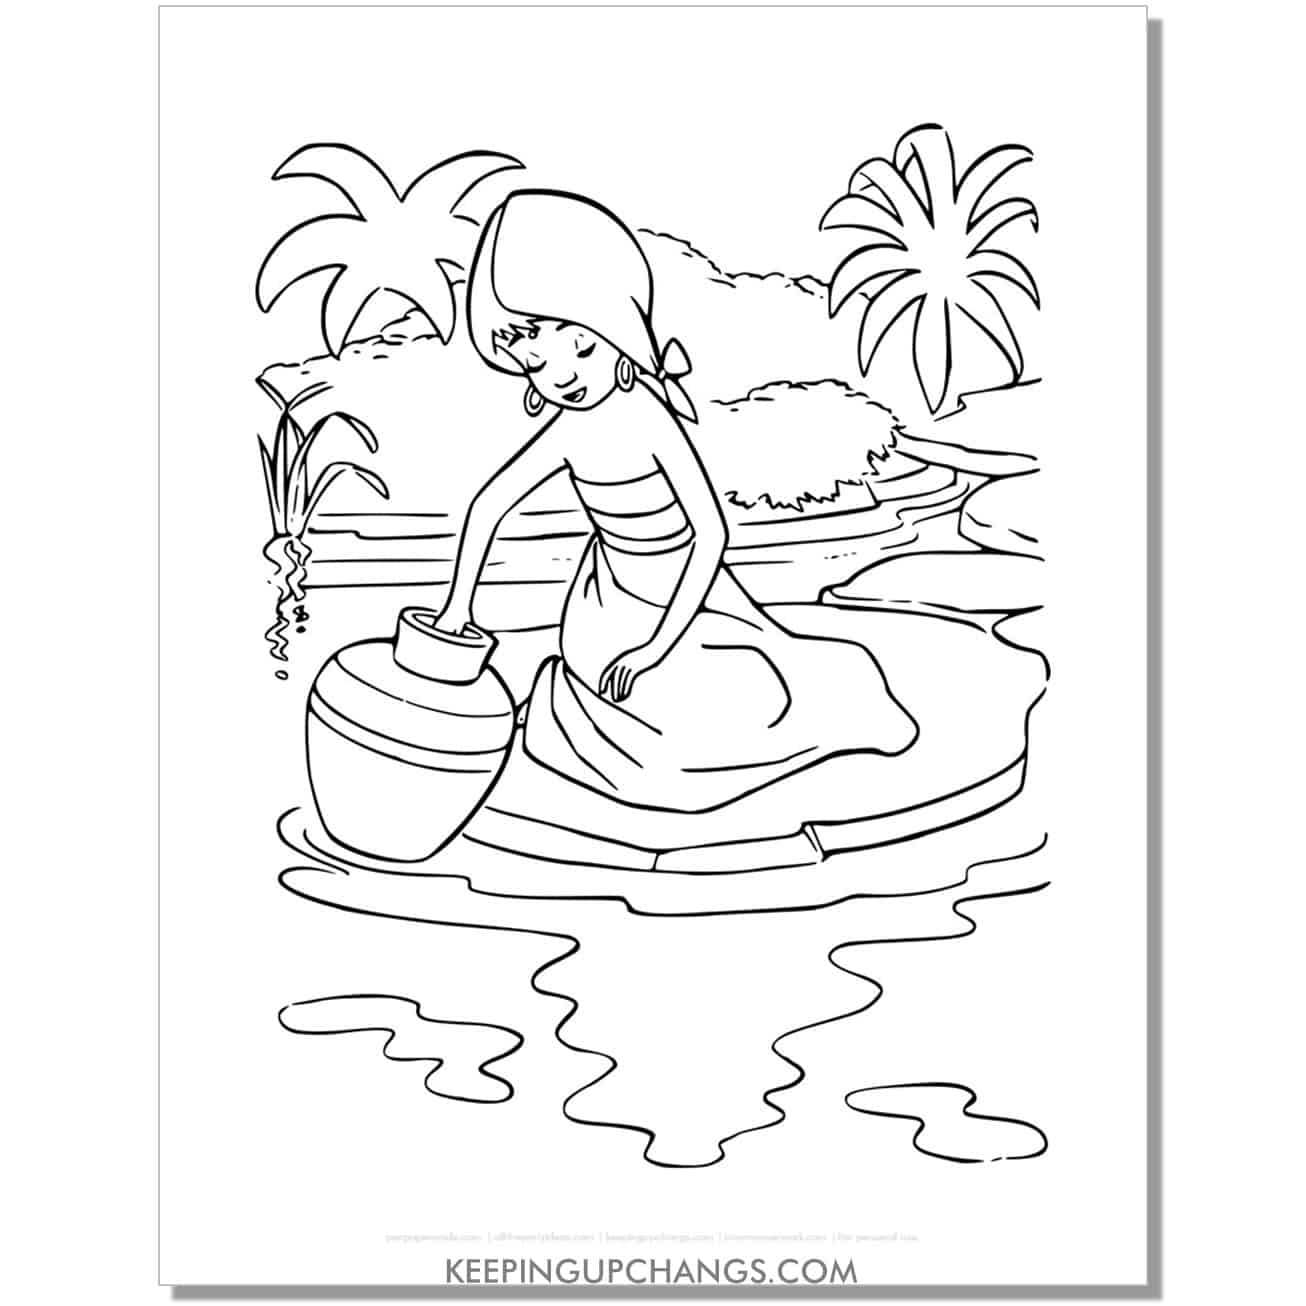 shanti getting water from river jungle book coloring page, sheet.